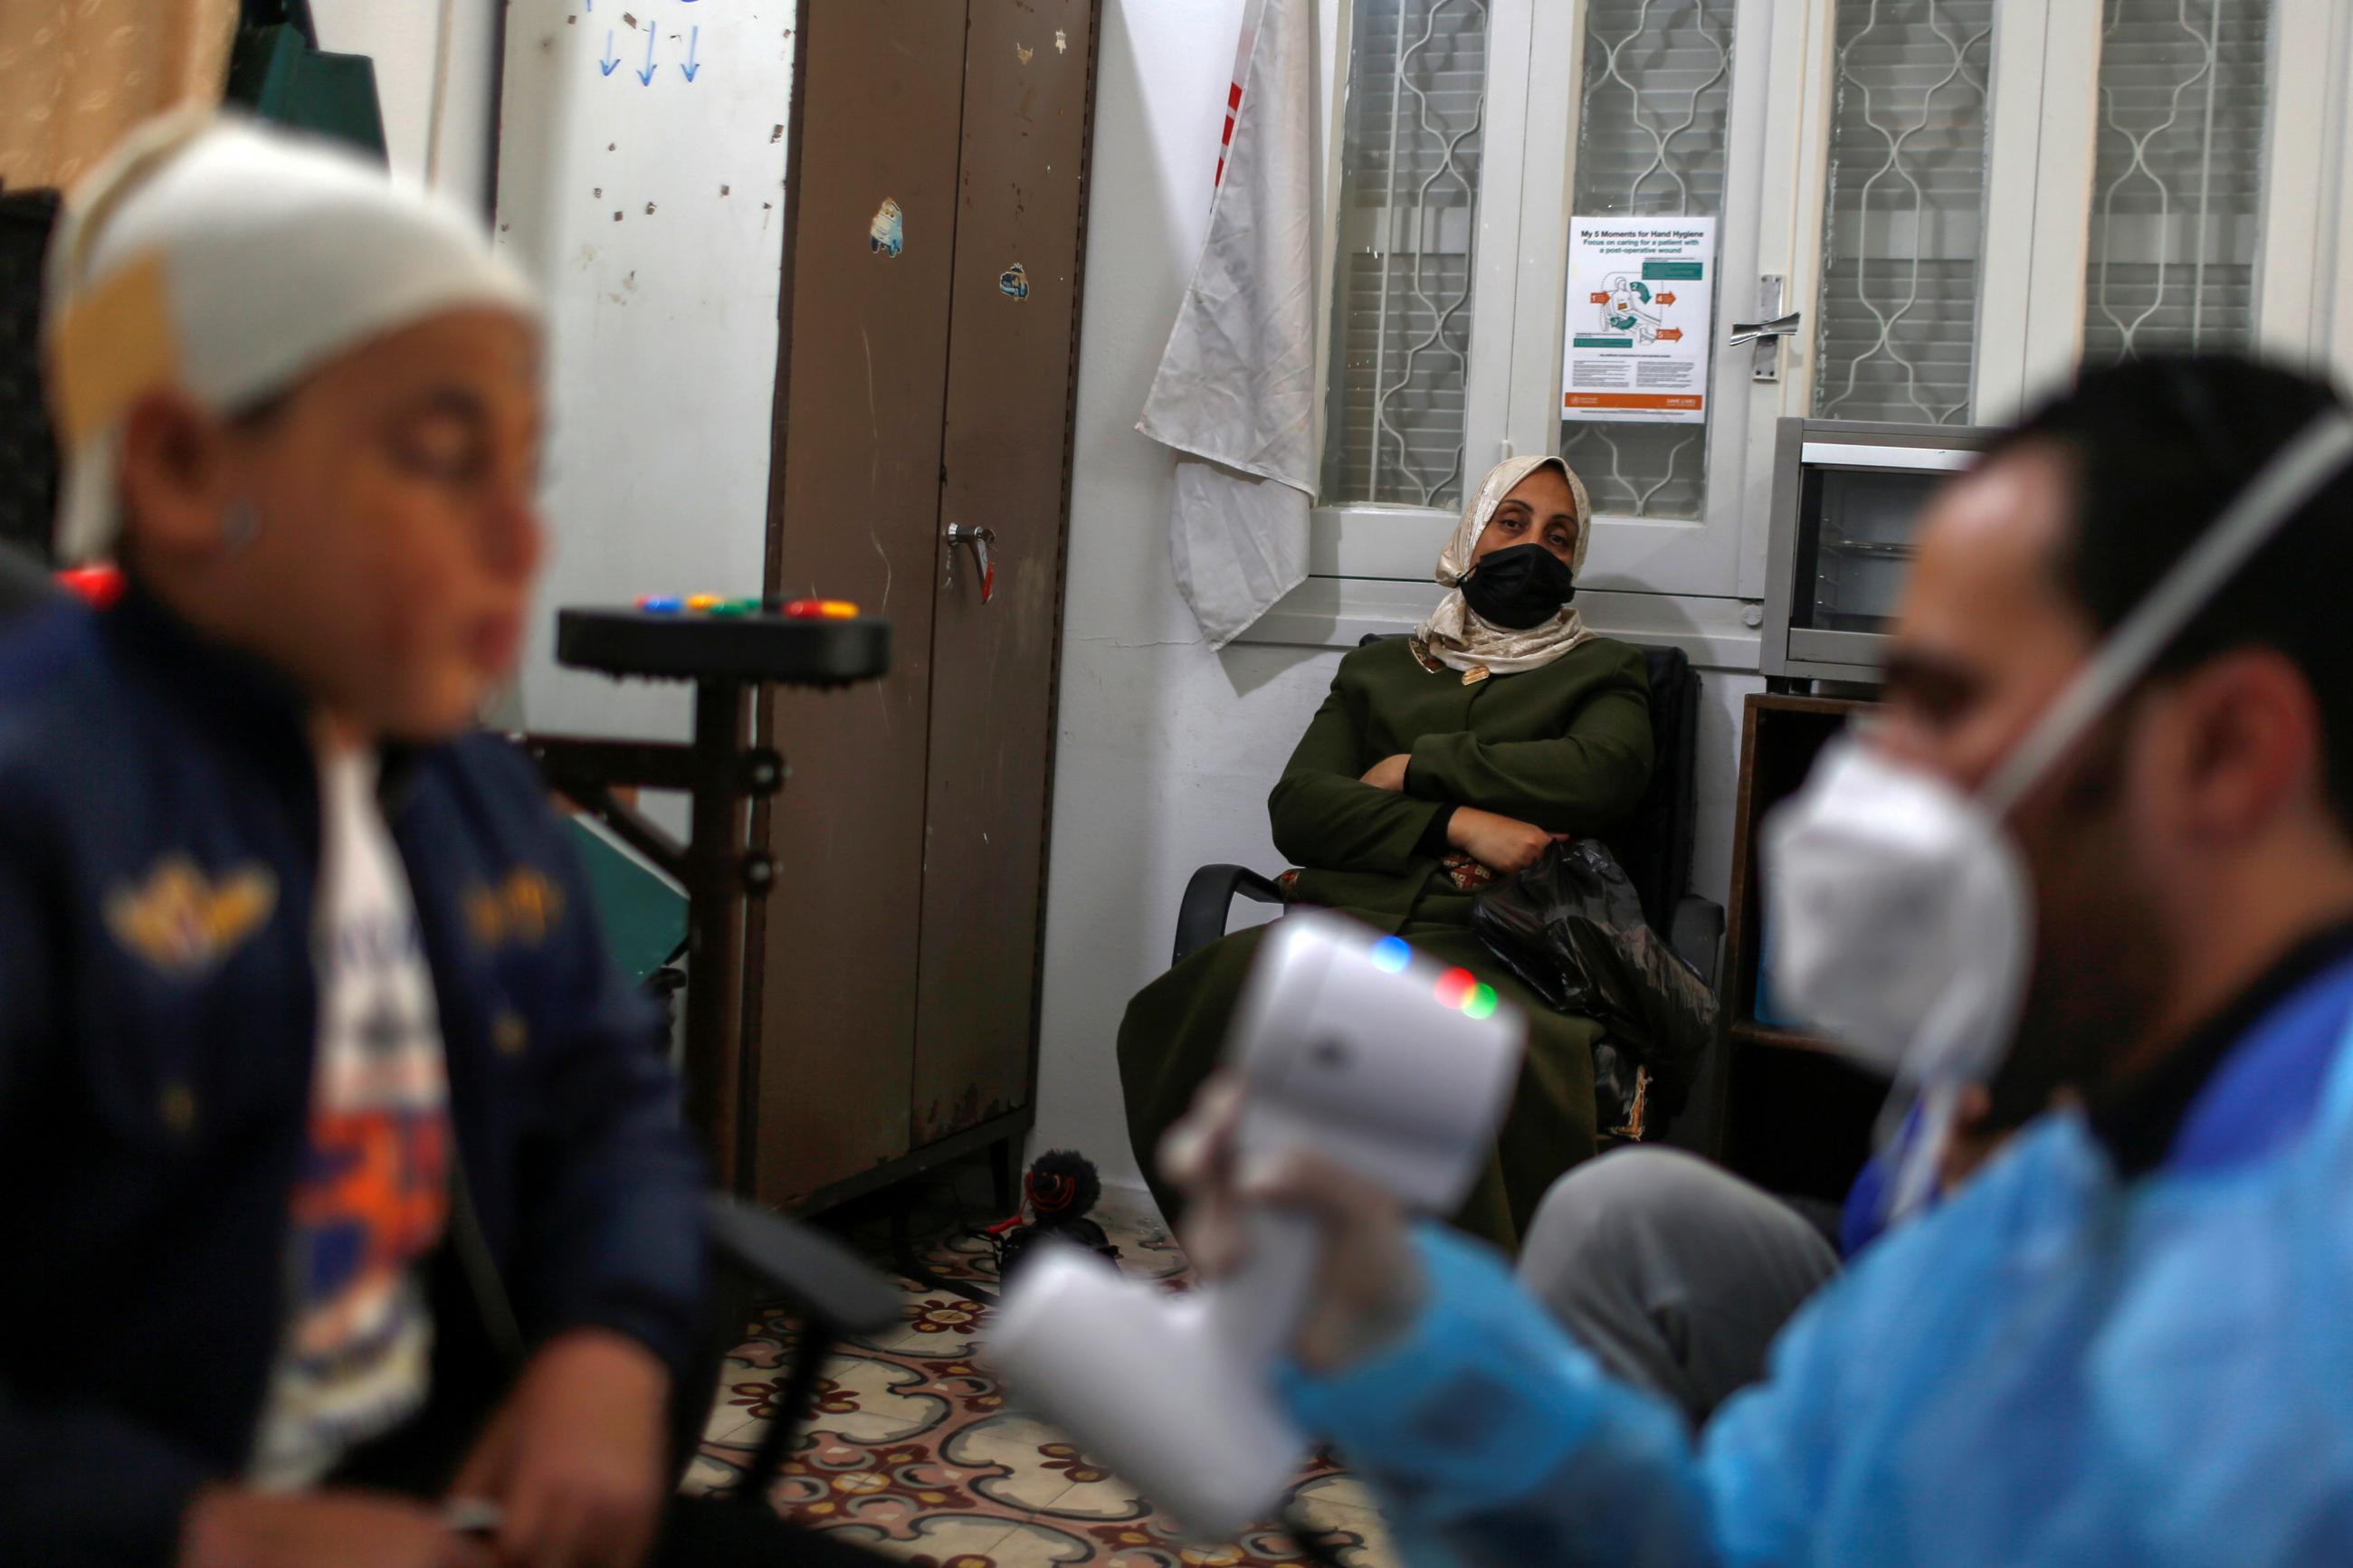 The mother of Palestinian boy Ahmed Al-Deeb, who has severe facial burns, looks on as he waits to be fitted with a 3D transparent face mask at Medecins Sans Frontieres (MSF)'s clinic in Gaza City February 8, 2021.